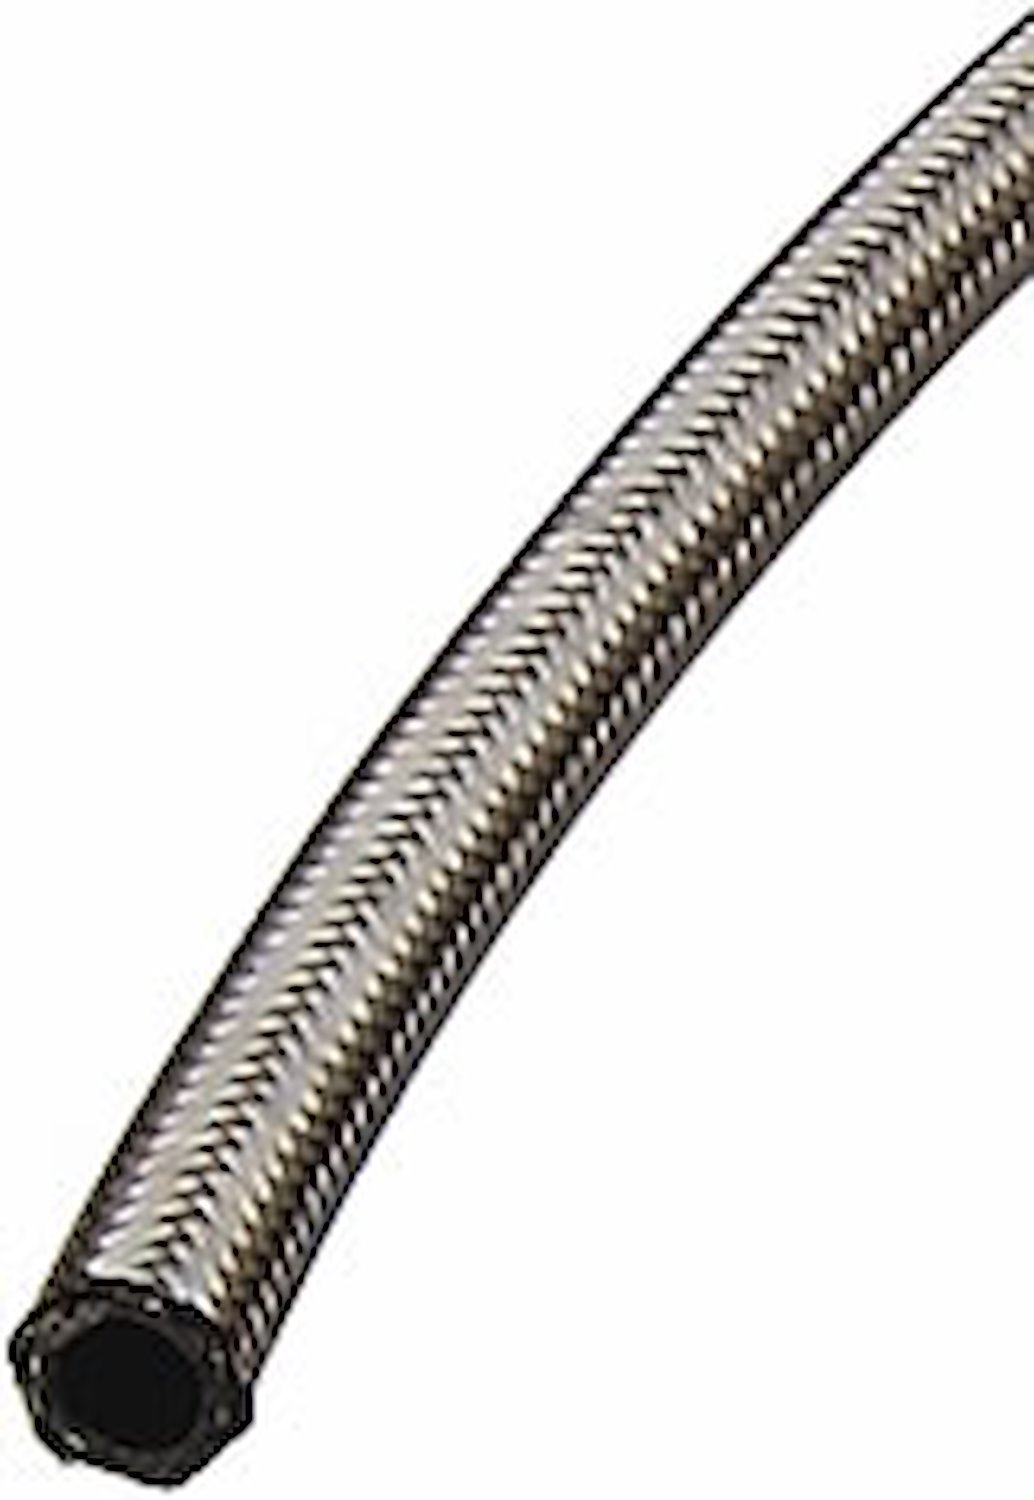 Pro-Flo 200 Series Stainless Steel Braided Hose -08 AN [6 ft.]